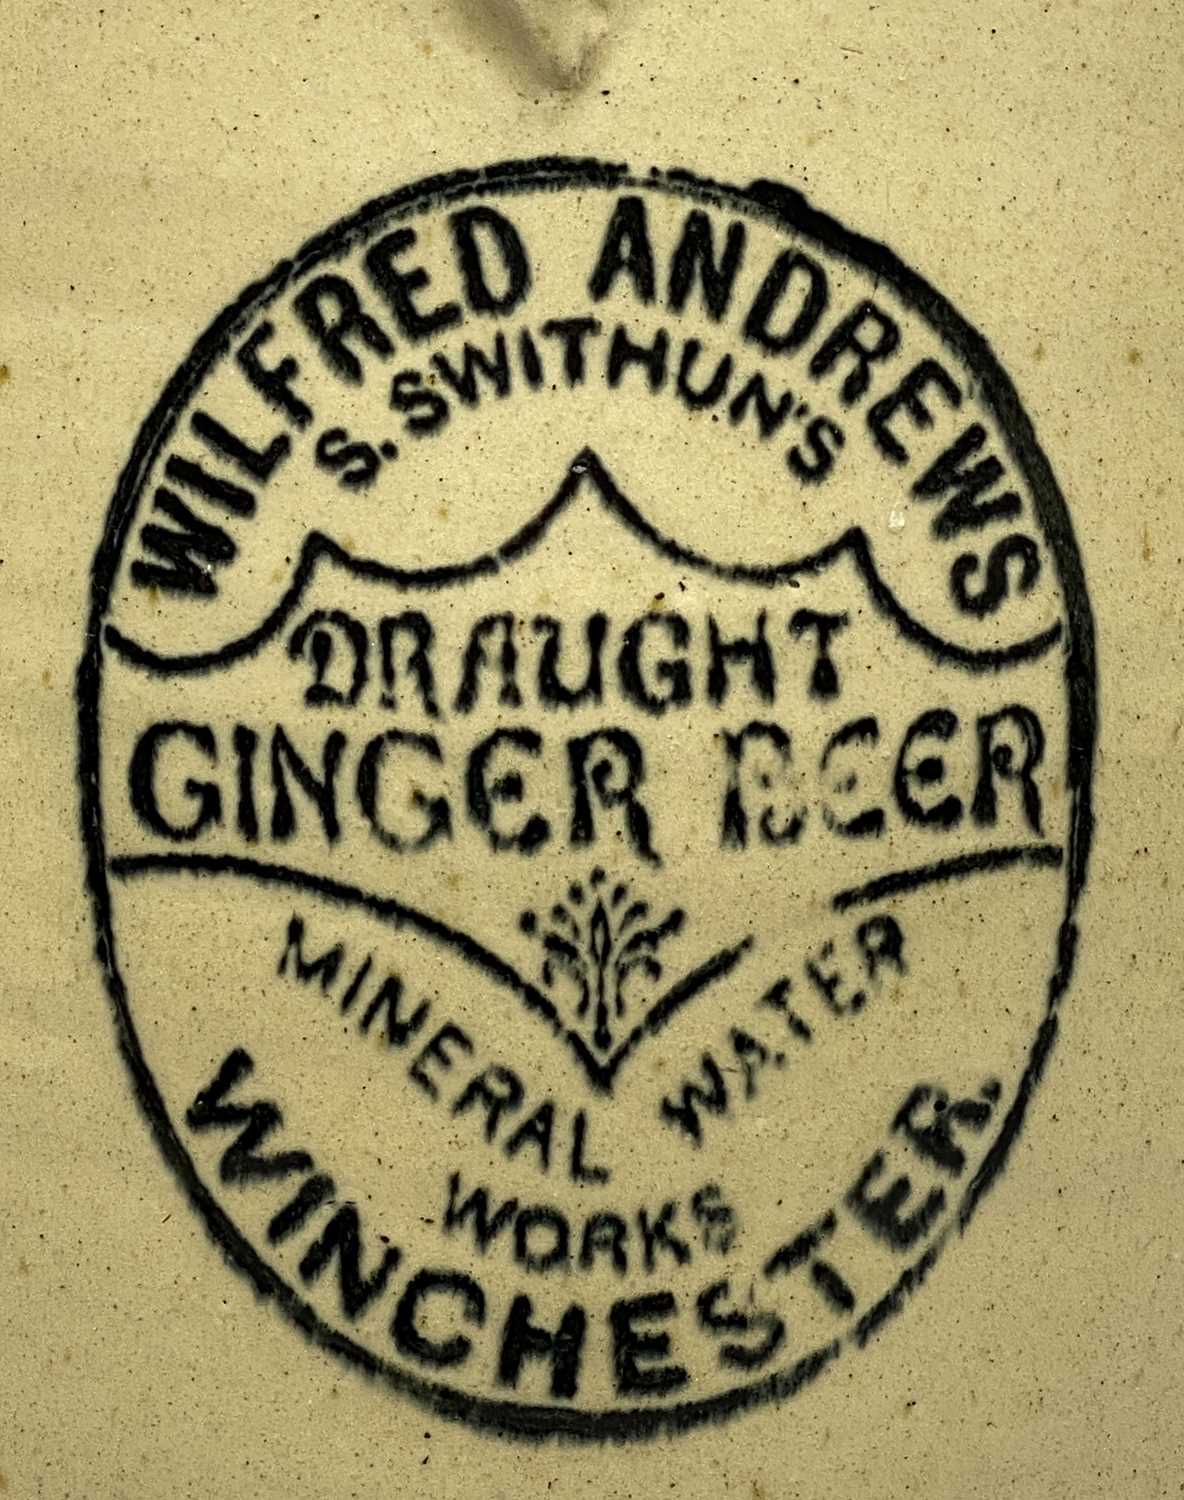 THREE ANTIQUE STONEWARE FLAGONS, Wilfred Andrews St Swithuns, draught ginger beer, 43cms (h), - Image 3 of 3